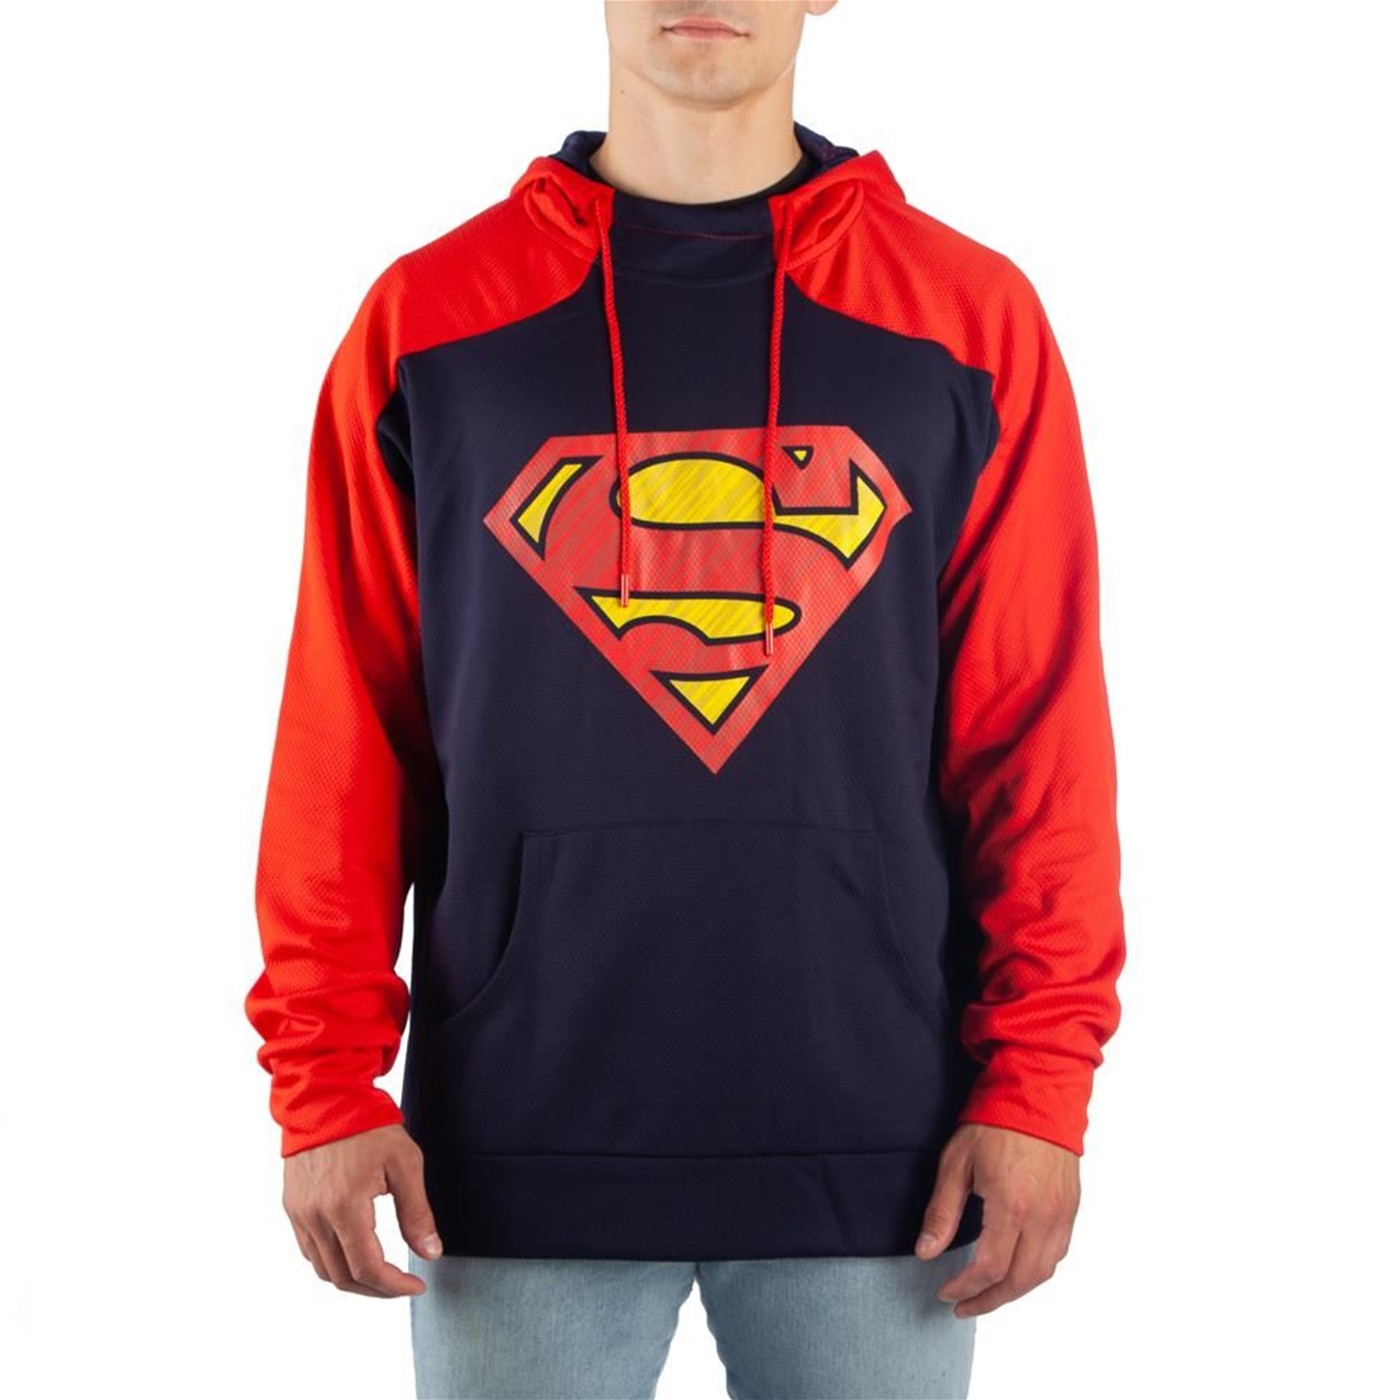 Superman Symbol Blue and Red Athletic Men's Hooded Sweatshirt